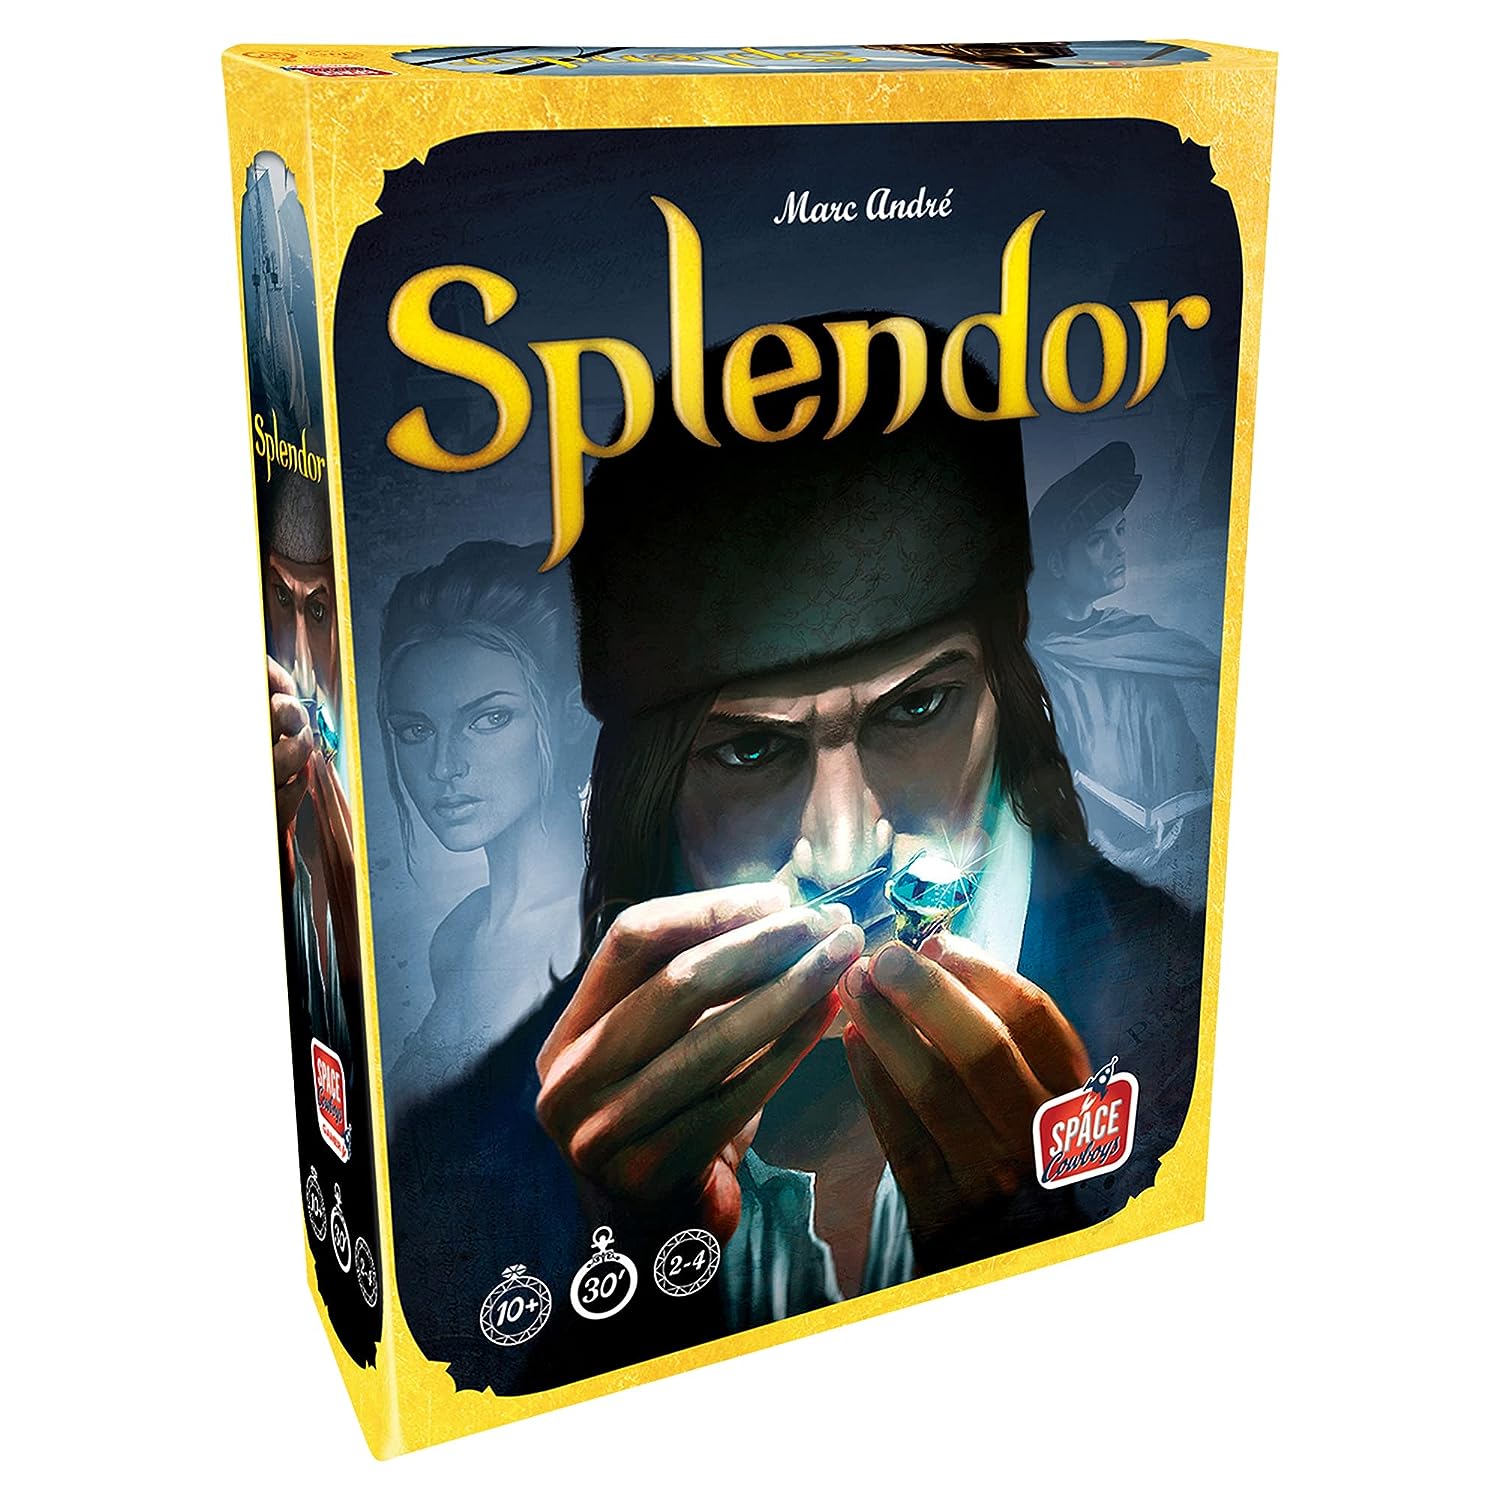 Kids Mandi Splendor board game with colorful gemstones and cards.